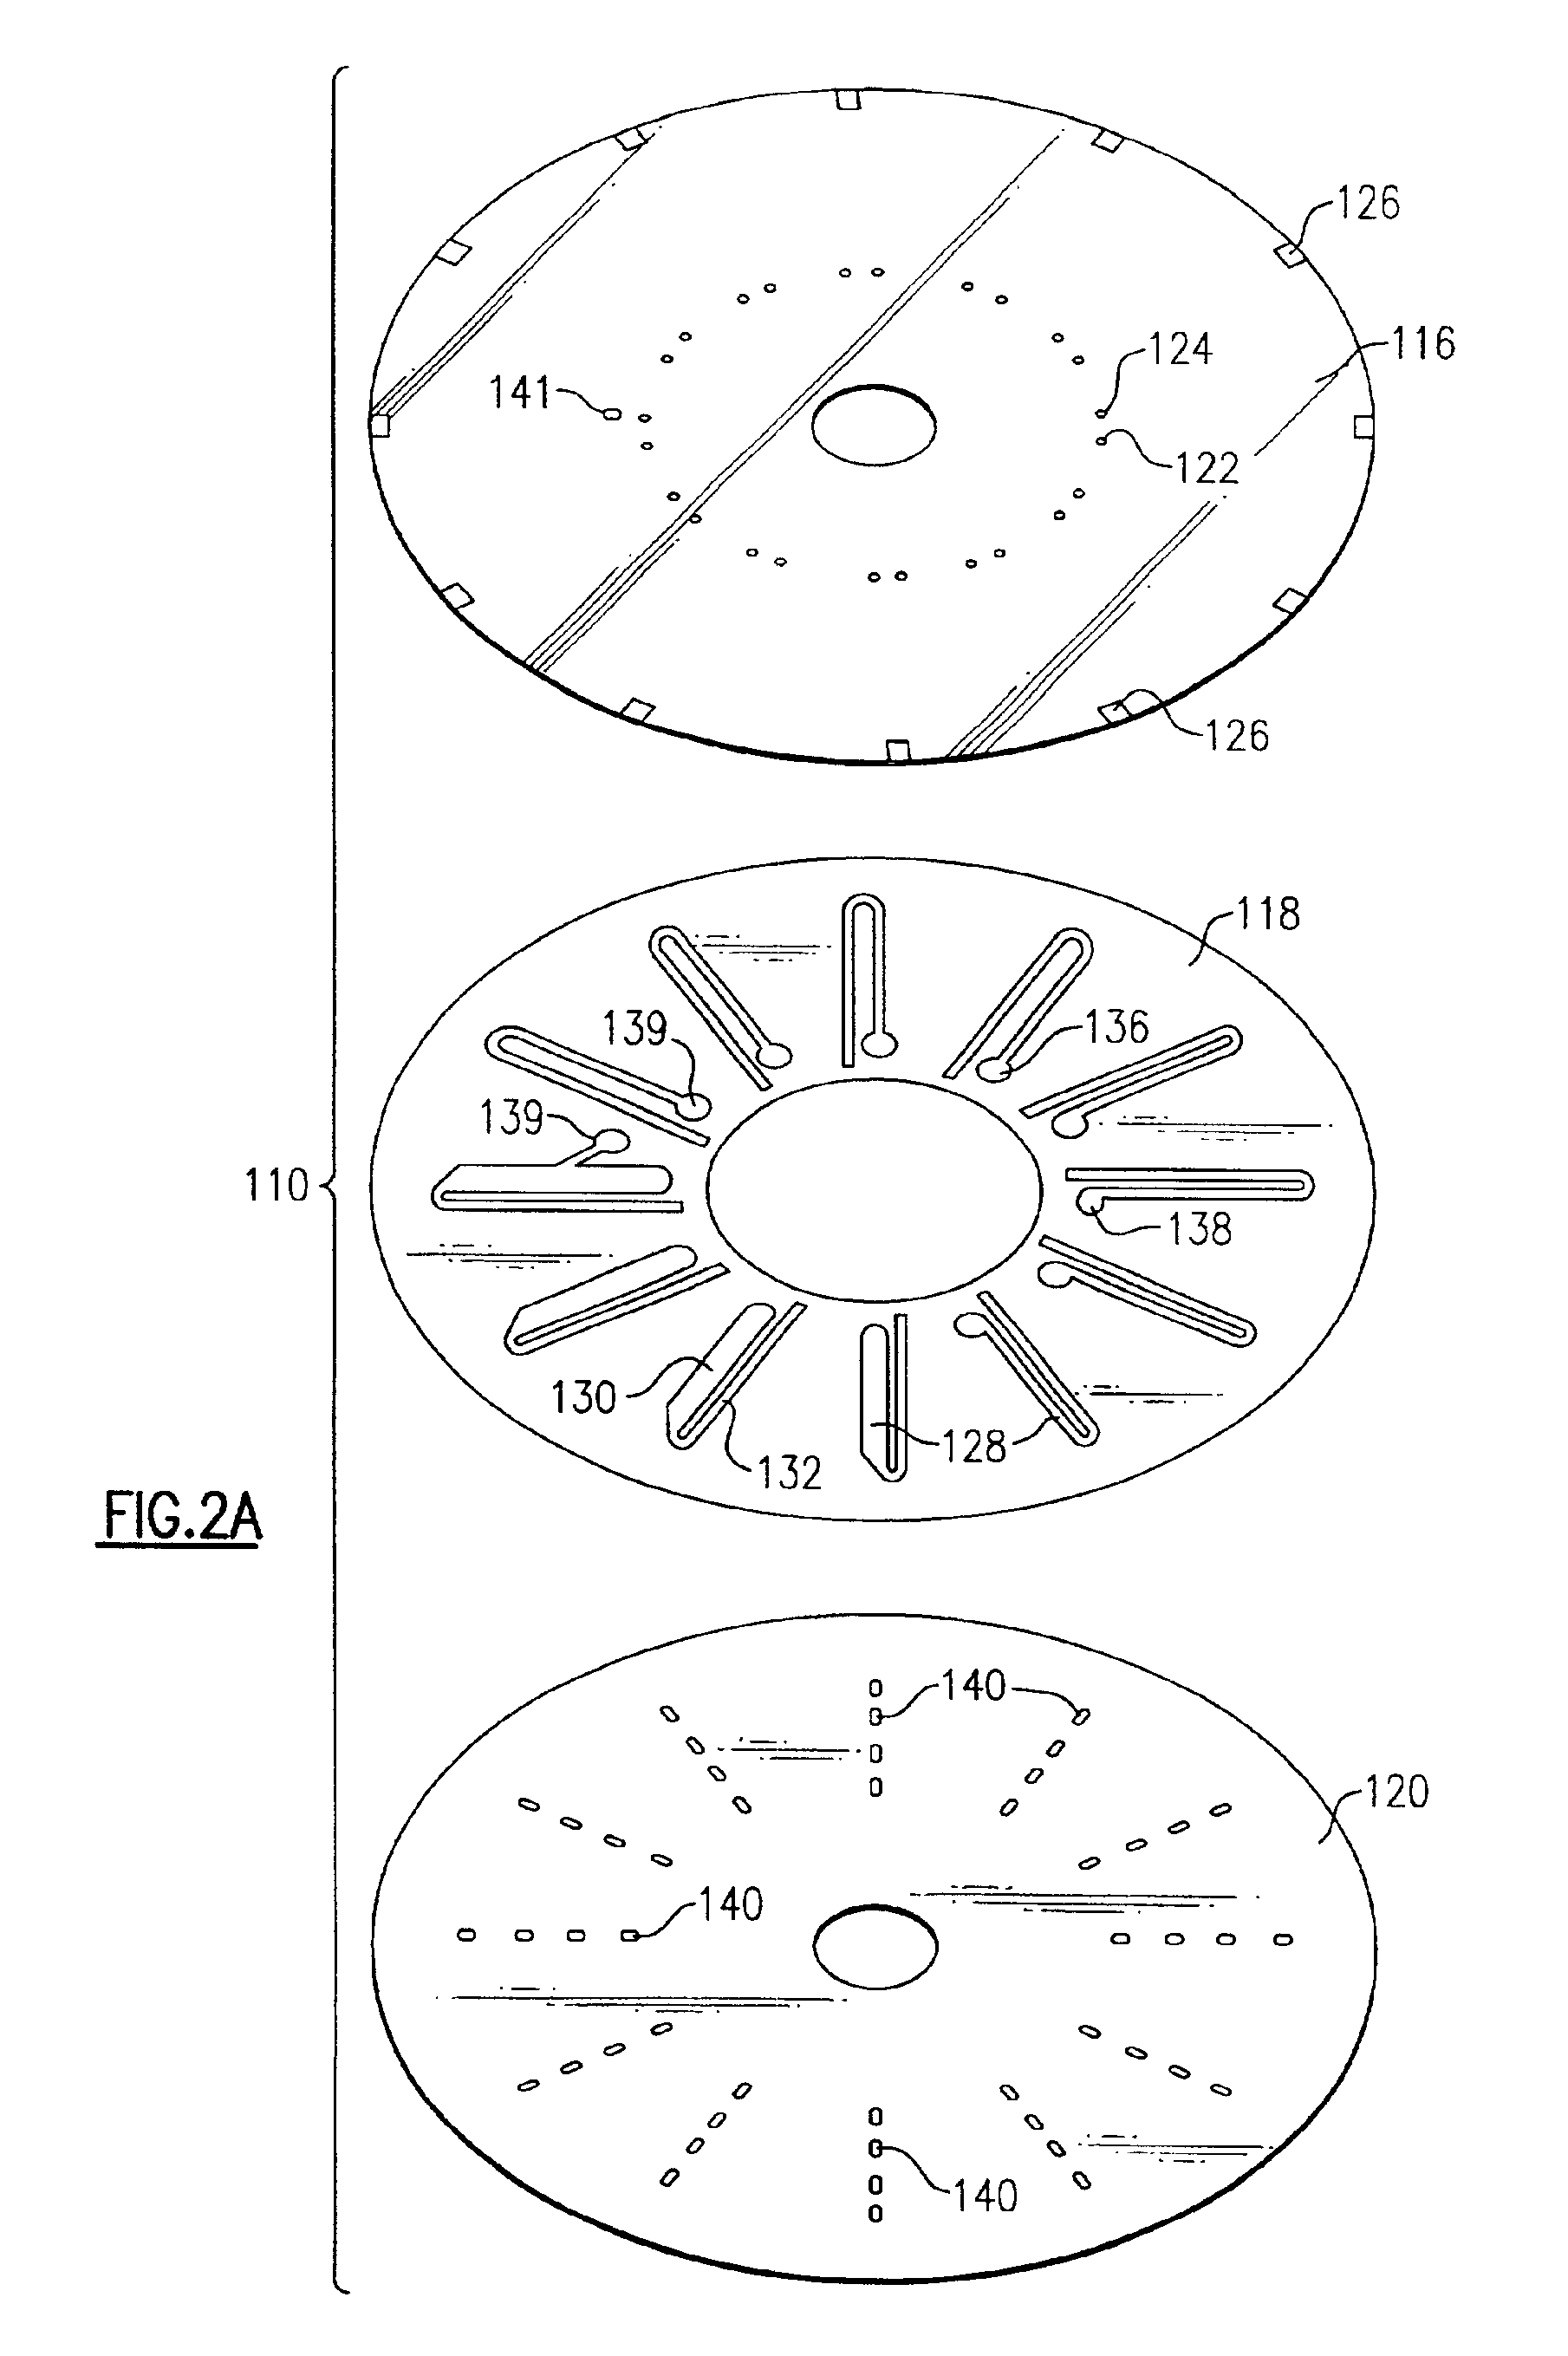 Surface assembly for immobilizing DNA capture probes in genetic assays using enzymatic reactions to generate signal in optical bio-discs and methods relating thereto